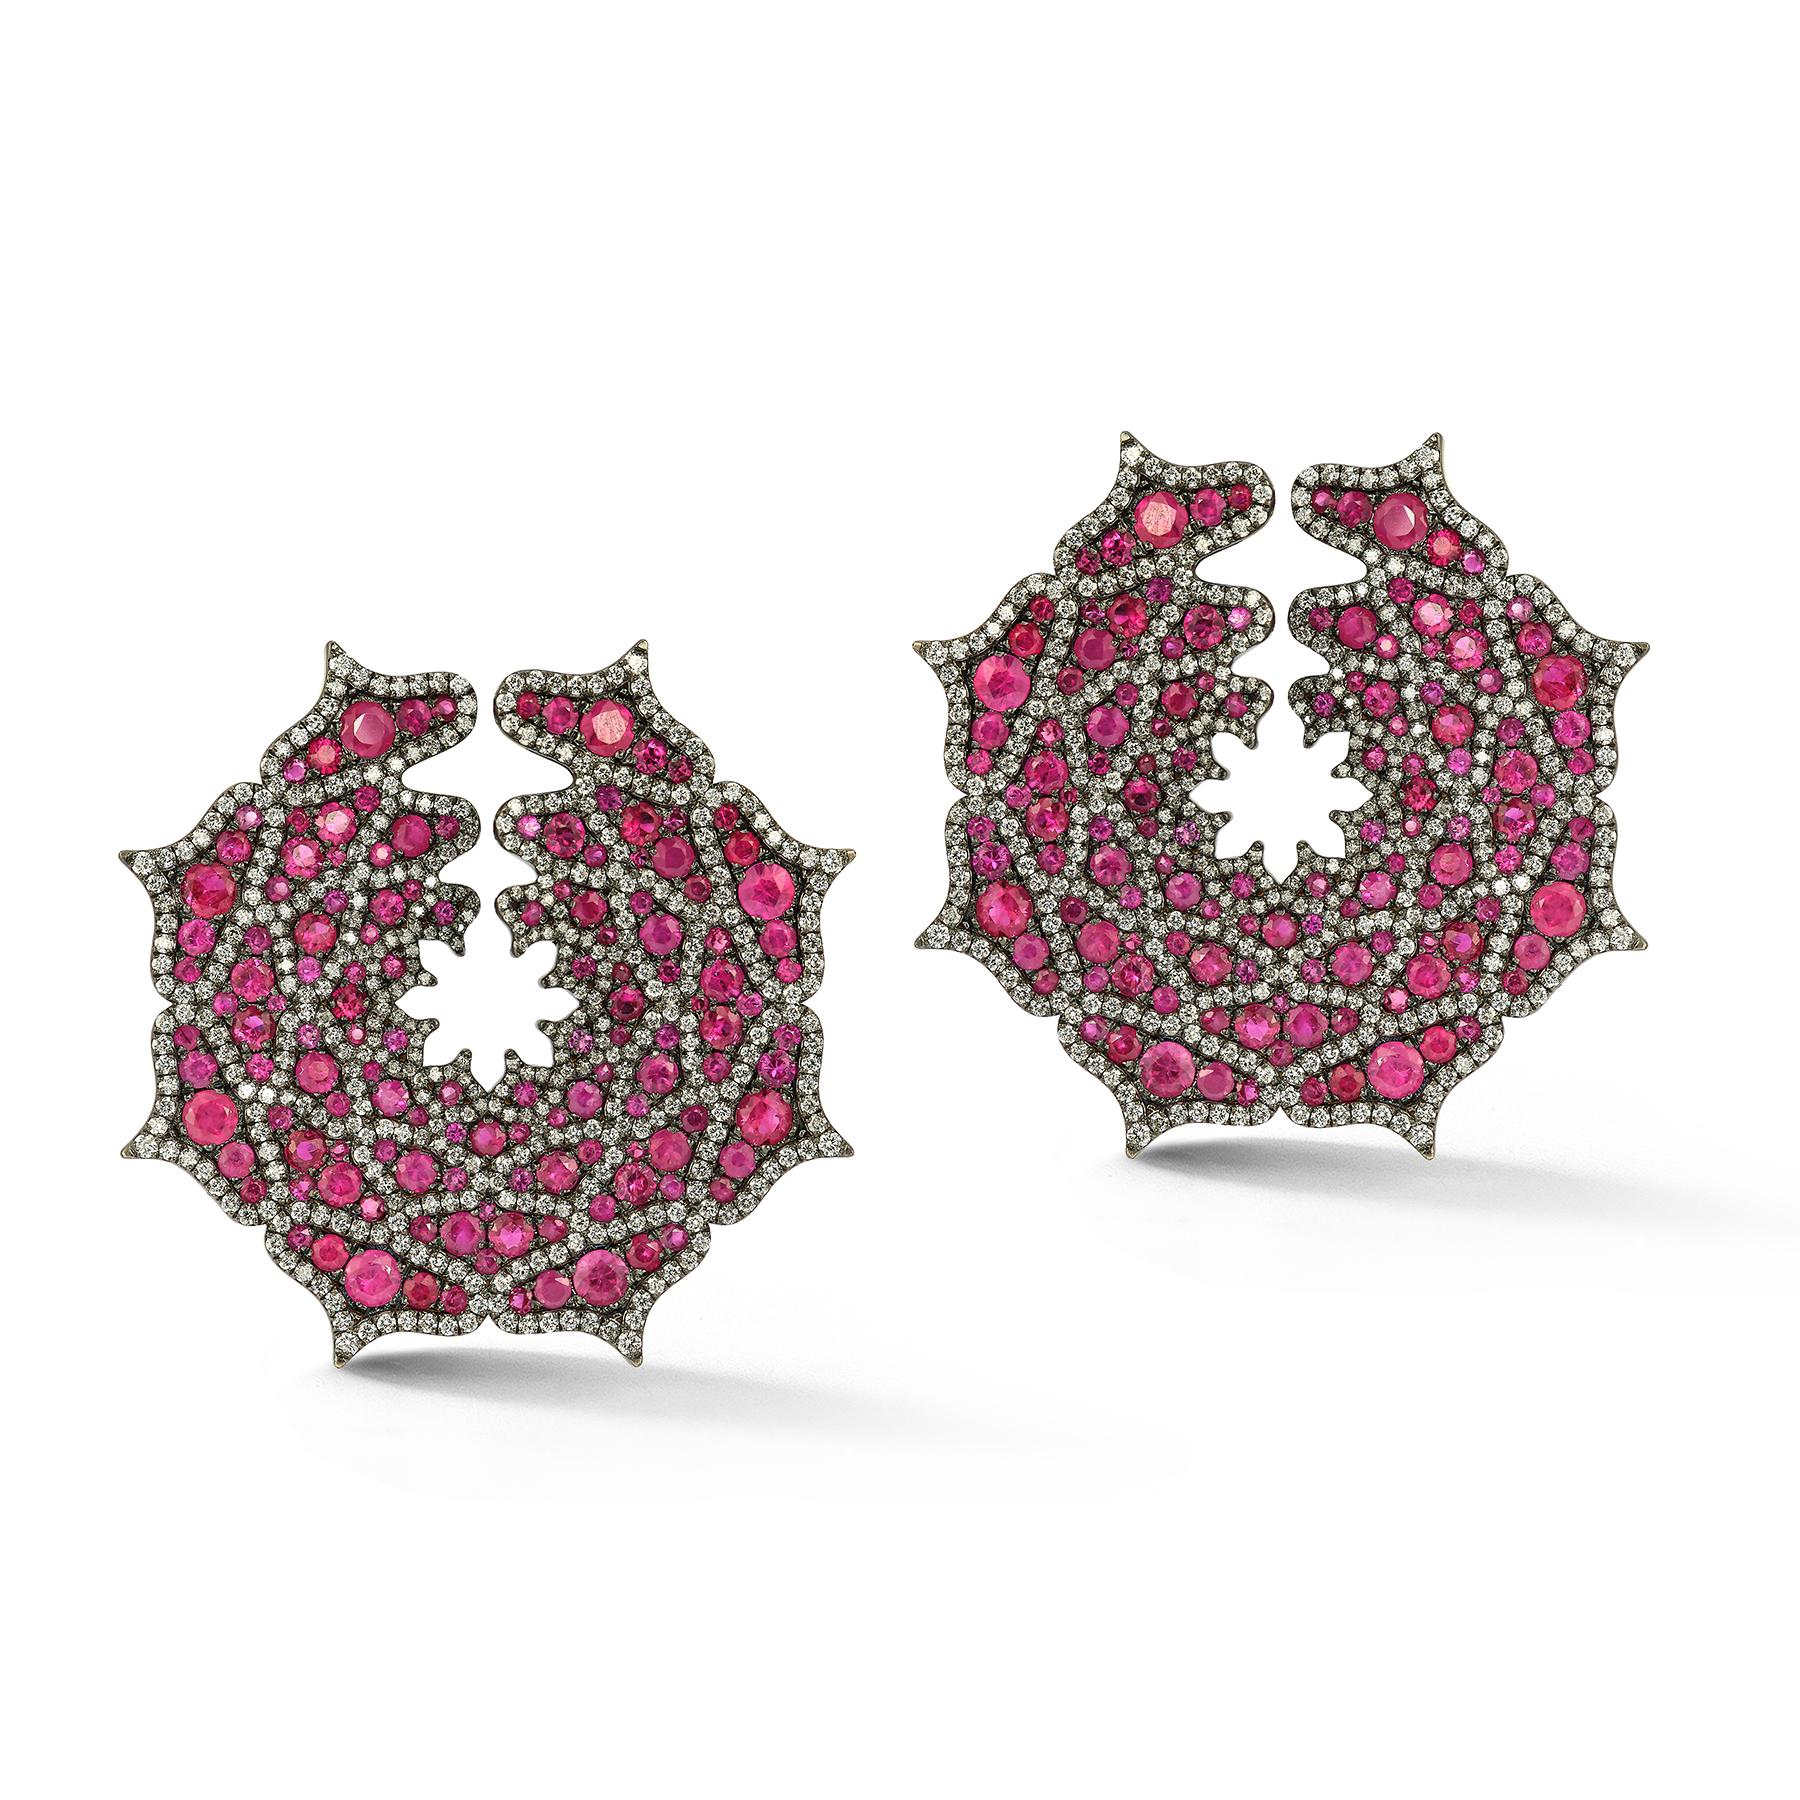 Ruby and Diamond Spider Web Spiral Earrings 

Round cut rubies & diamonds in a spider web motif 

Diamond Weight: 4.19 cts
Ruby Weight: 11.5 cts 

Back Type: clip on with post 

Measurements: 1.5